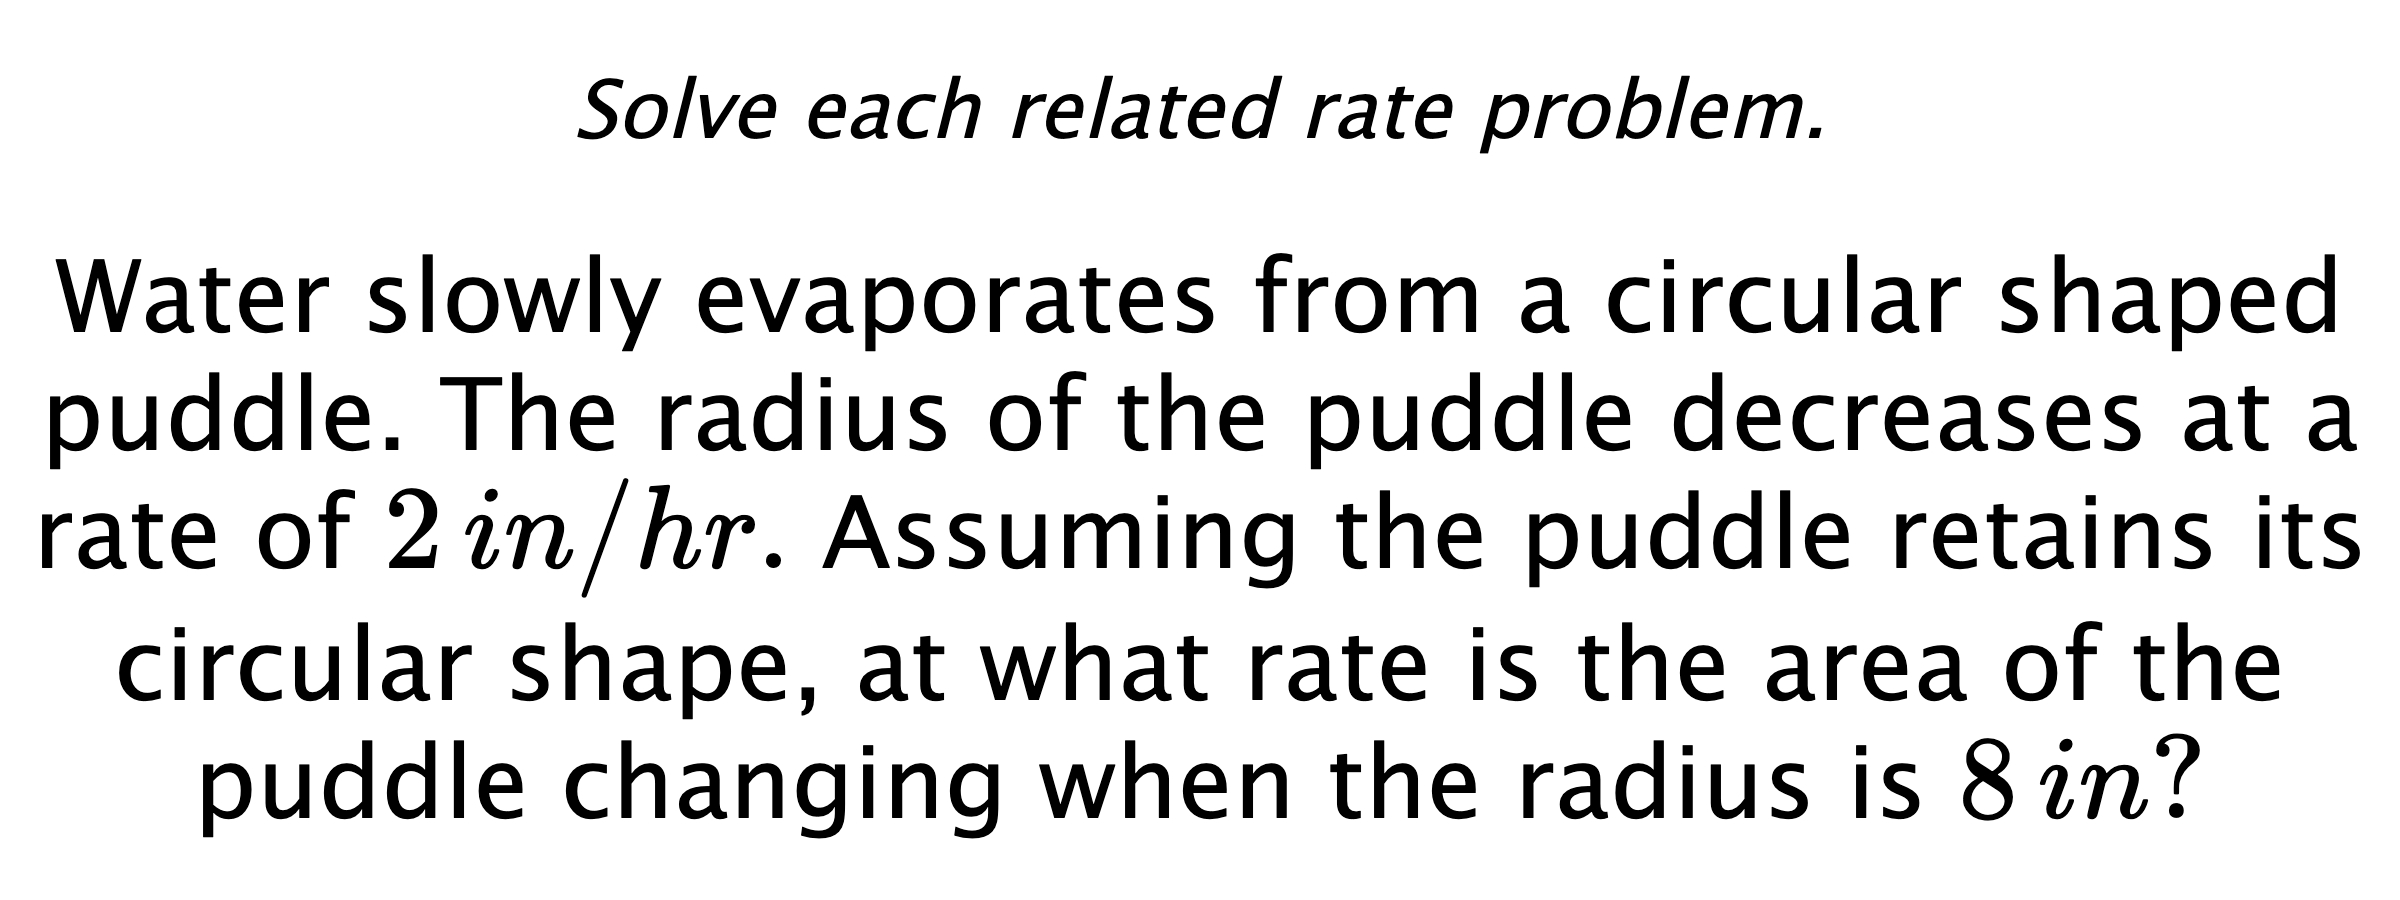 Solve each related rate problem. Water slowly evaporates from a circular shaped puddle. The radius of the puddle decreases at a rate of $2\,in/hr.$ Assuming the puddle retains its circular shape, at what rate is the area of the puddle changing when the radius is $8\,in?$